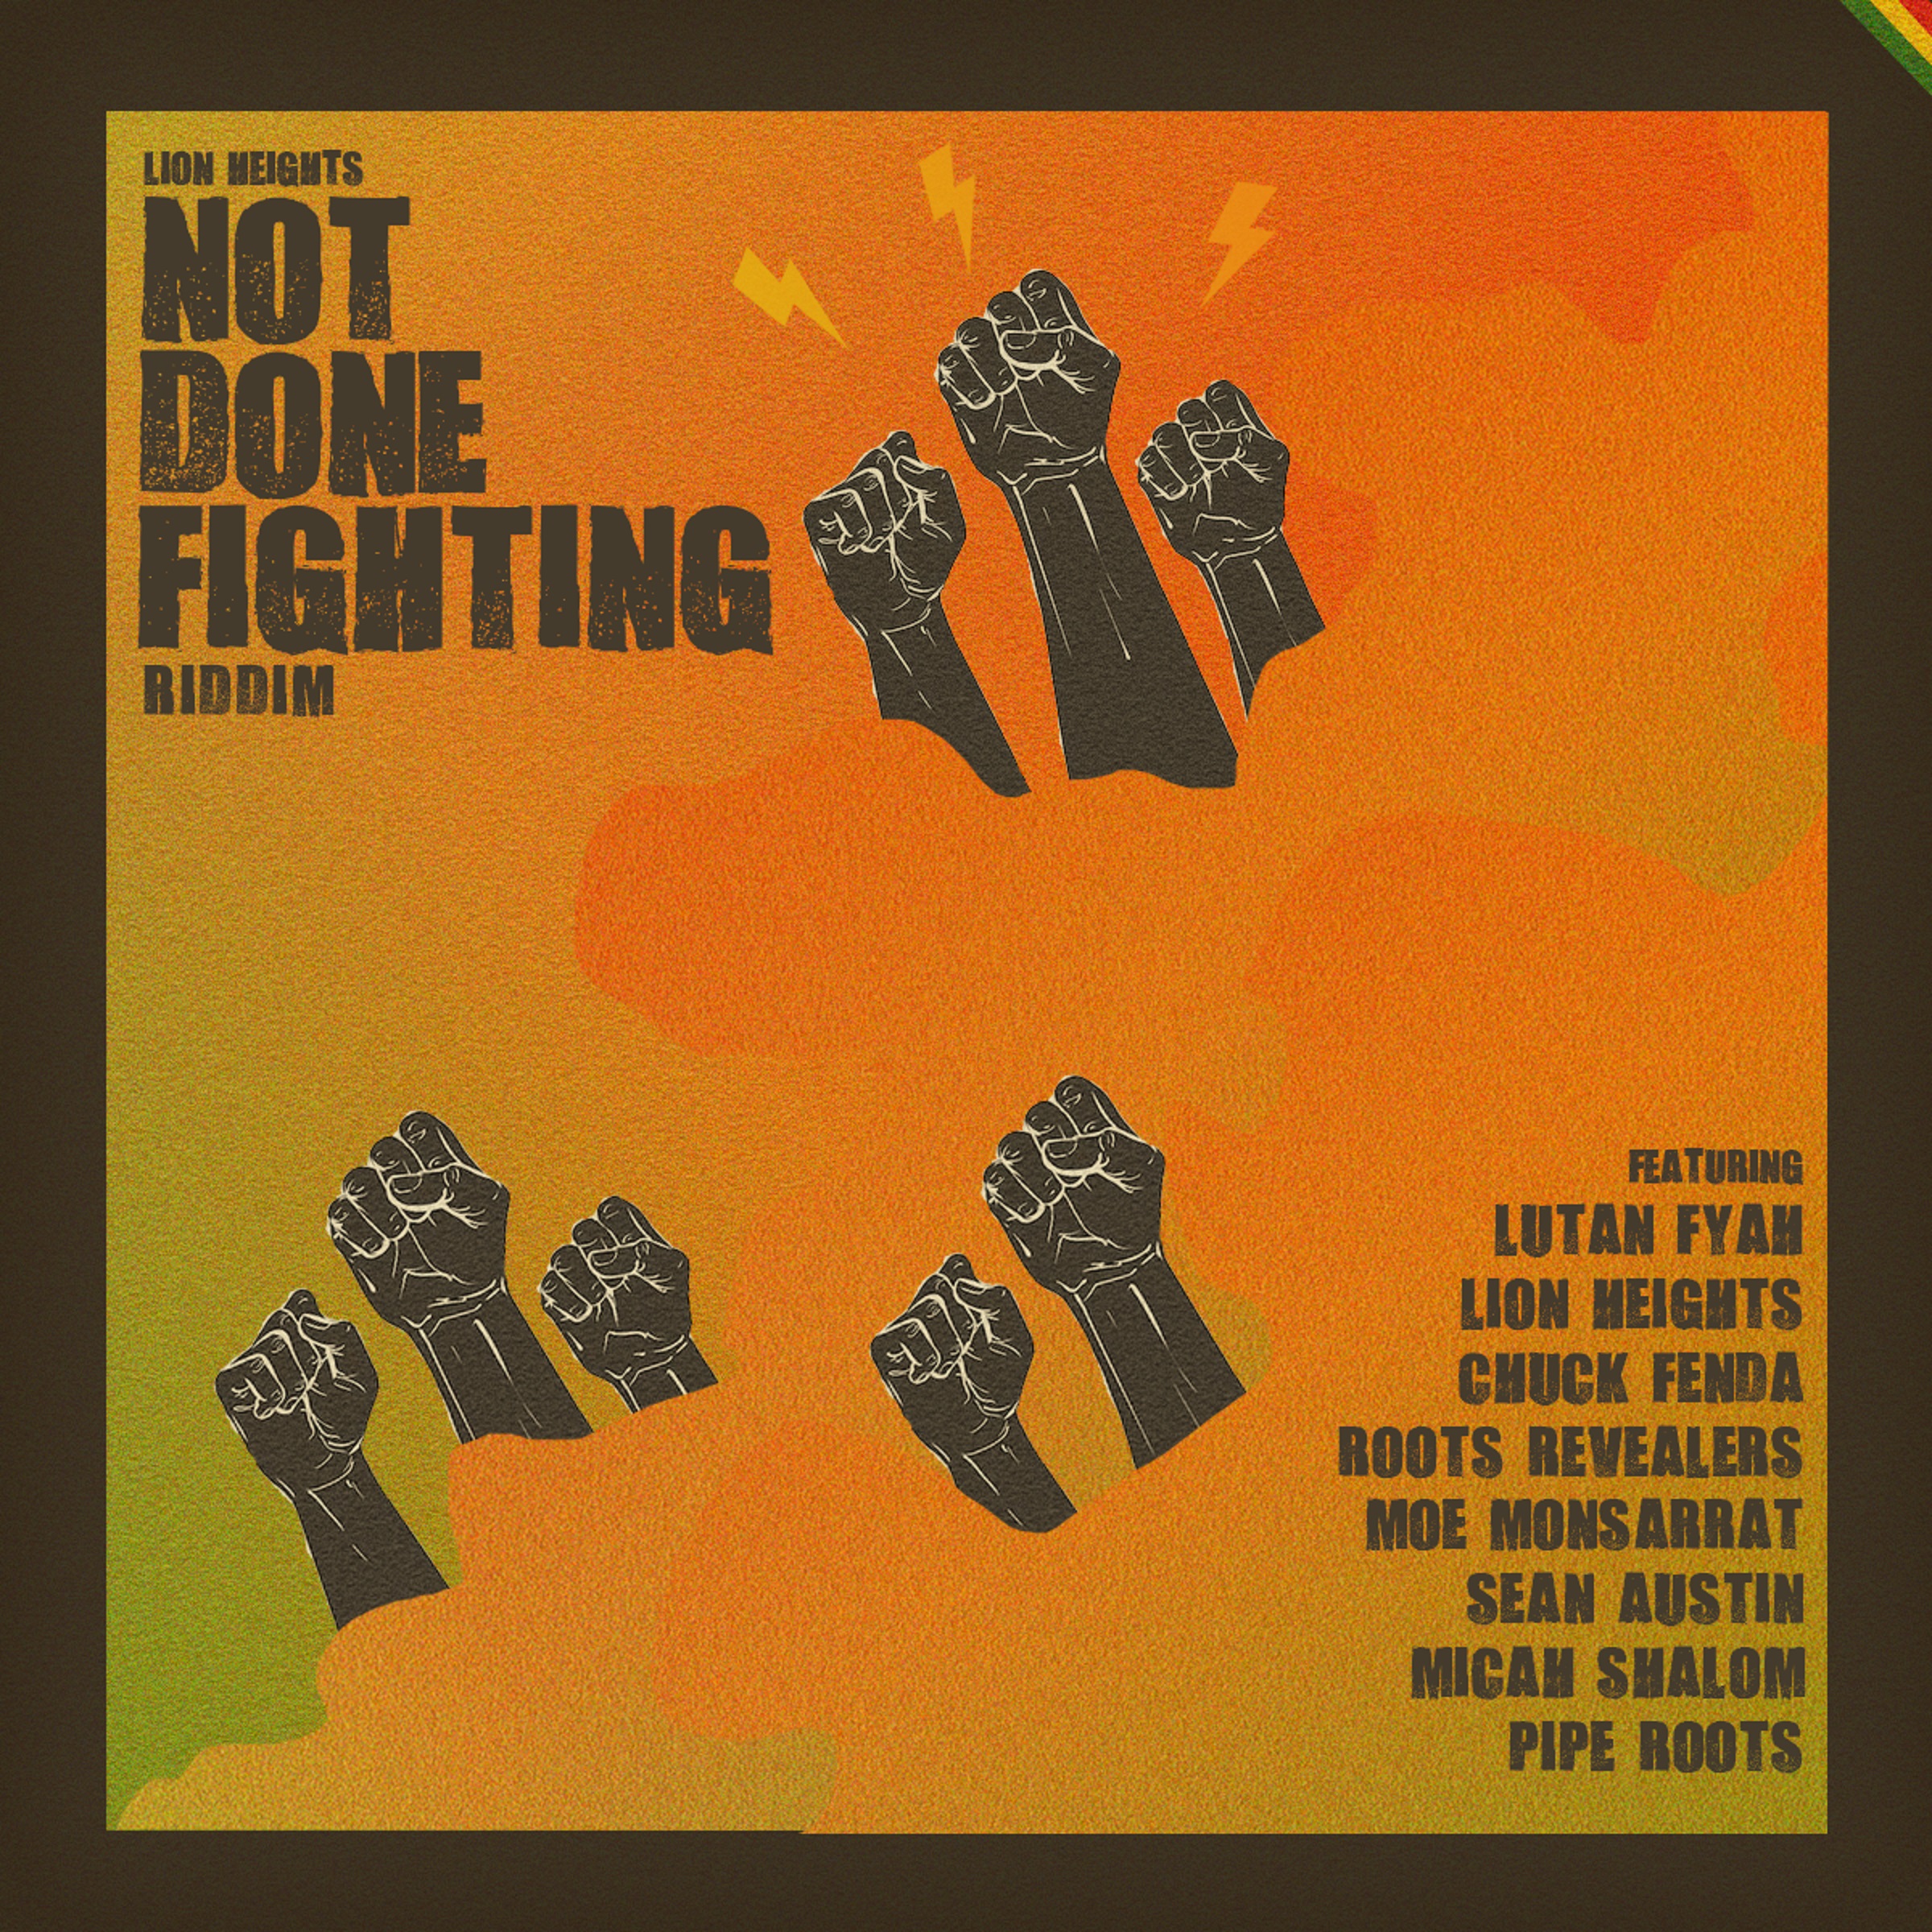 Lion Heights Announce Not Done Fighting Riddim Due For Release September 1st